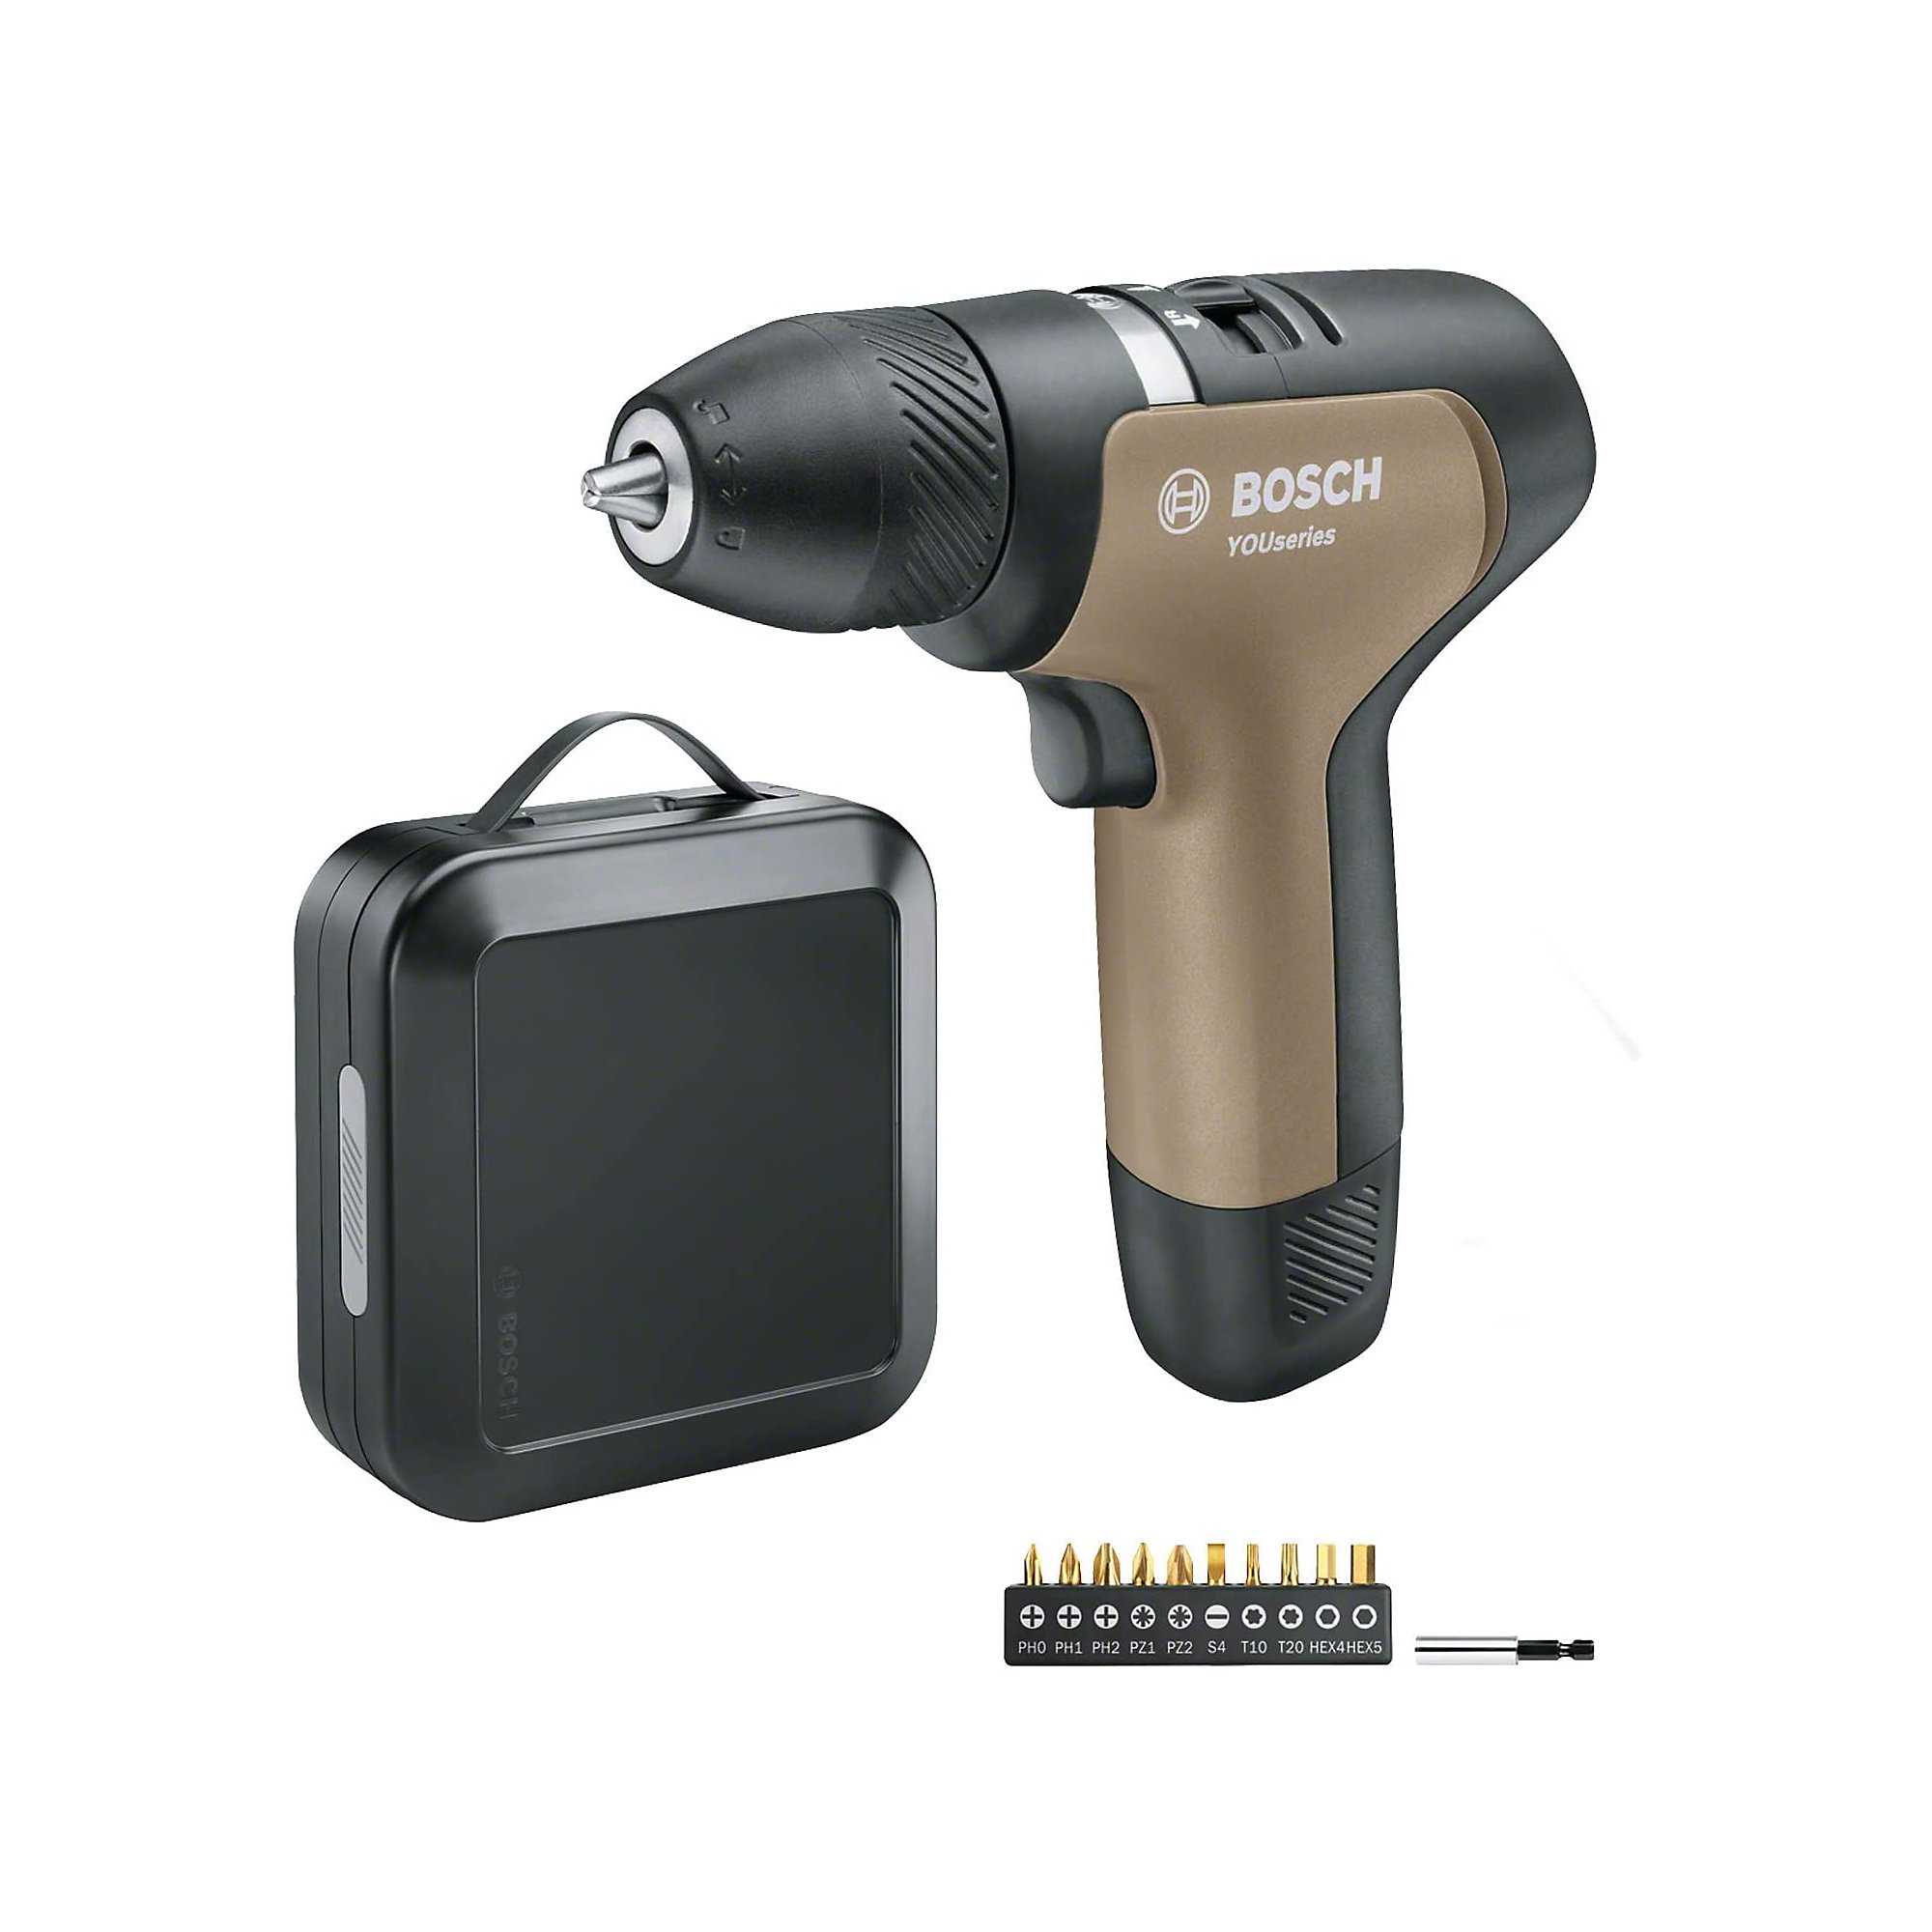 Bosch YOUseries Electric Power Drill